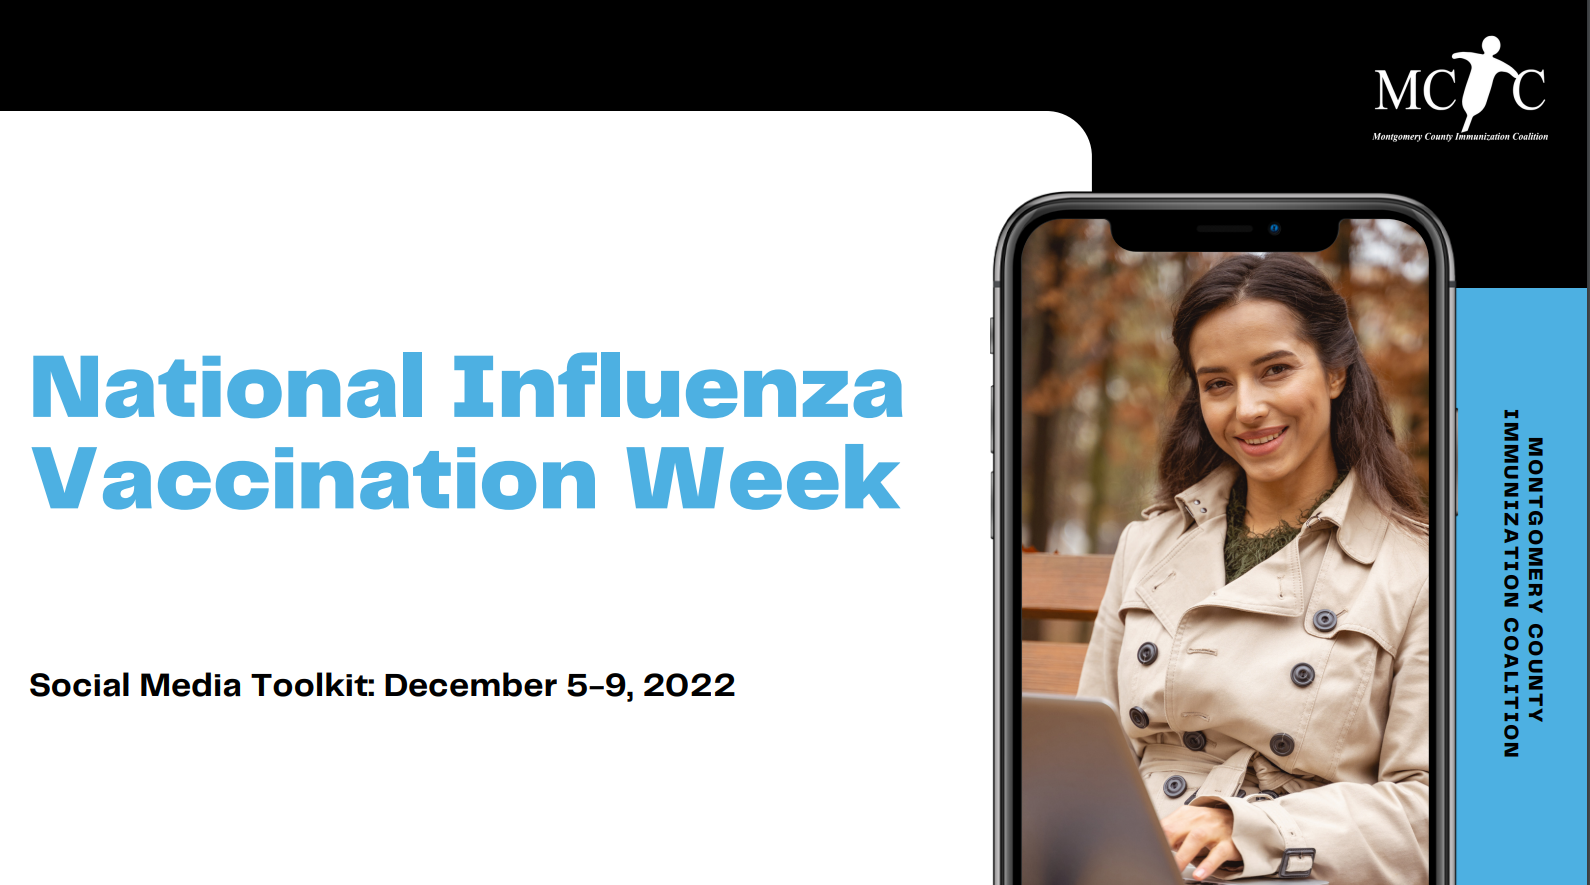 Cover of social media toolkit says "National Influenza Vaccination Week" with picture of a smiling young woman.